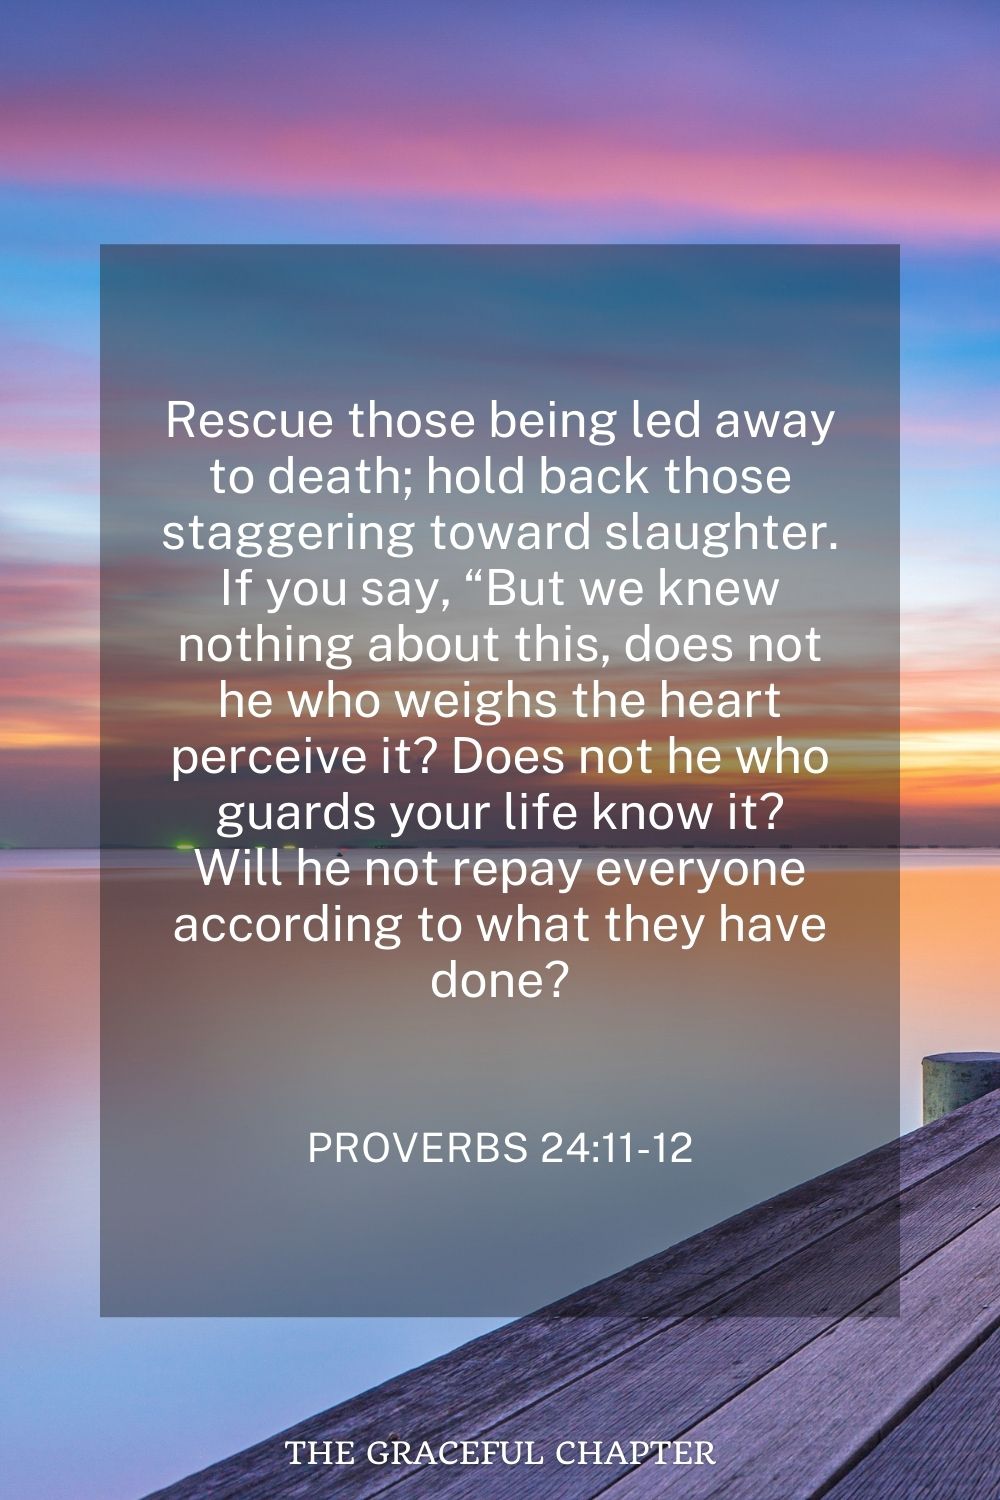 Rescue those being led away to death; hold back those staggering toward slaughter. If you say, “But we knew nothing about this, does not he who weighs the heart perceive it? Does not he who guards your life know it? Will he not repay everyone according to what they have done? Proverbs 24:11-12